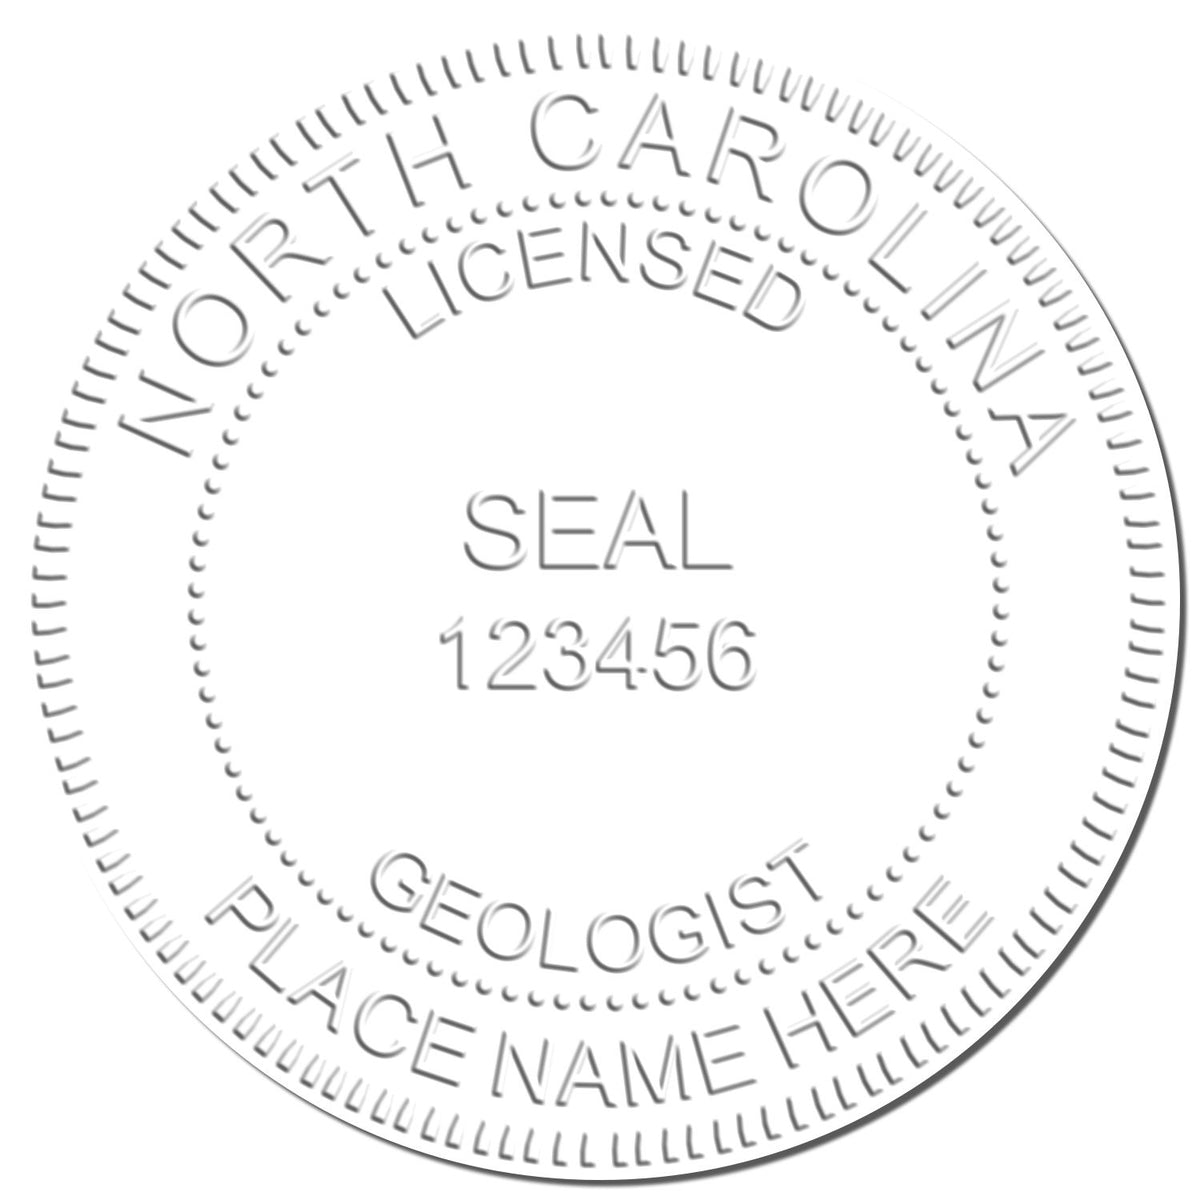 This paper is stamped with a sample imprint of the Handheld North Carolina Professional Geologist Embosser, signifying its quality and reliability.